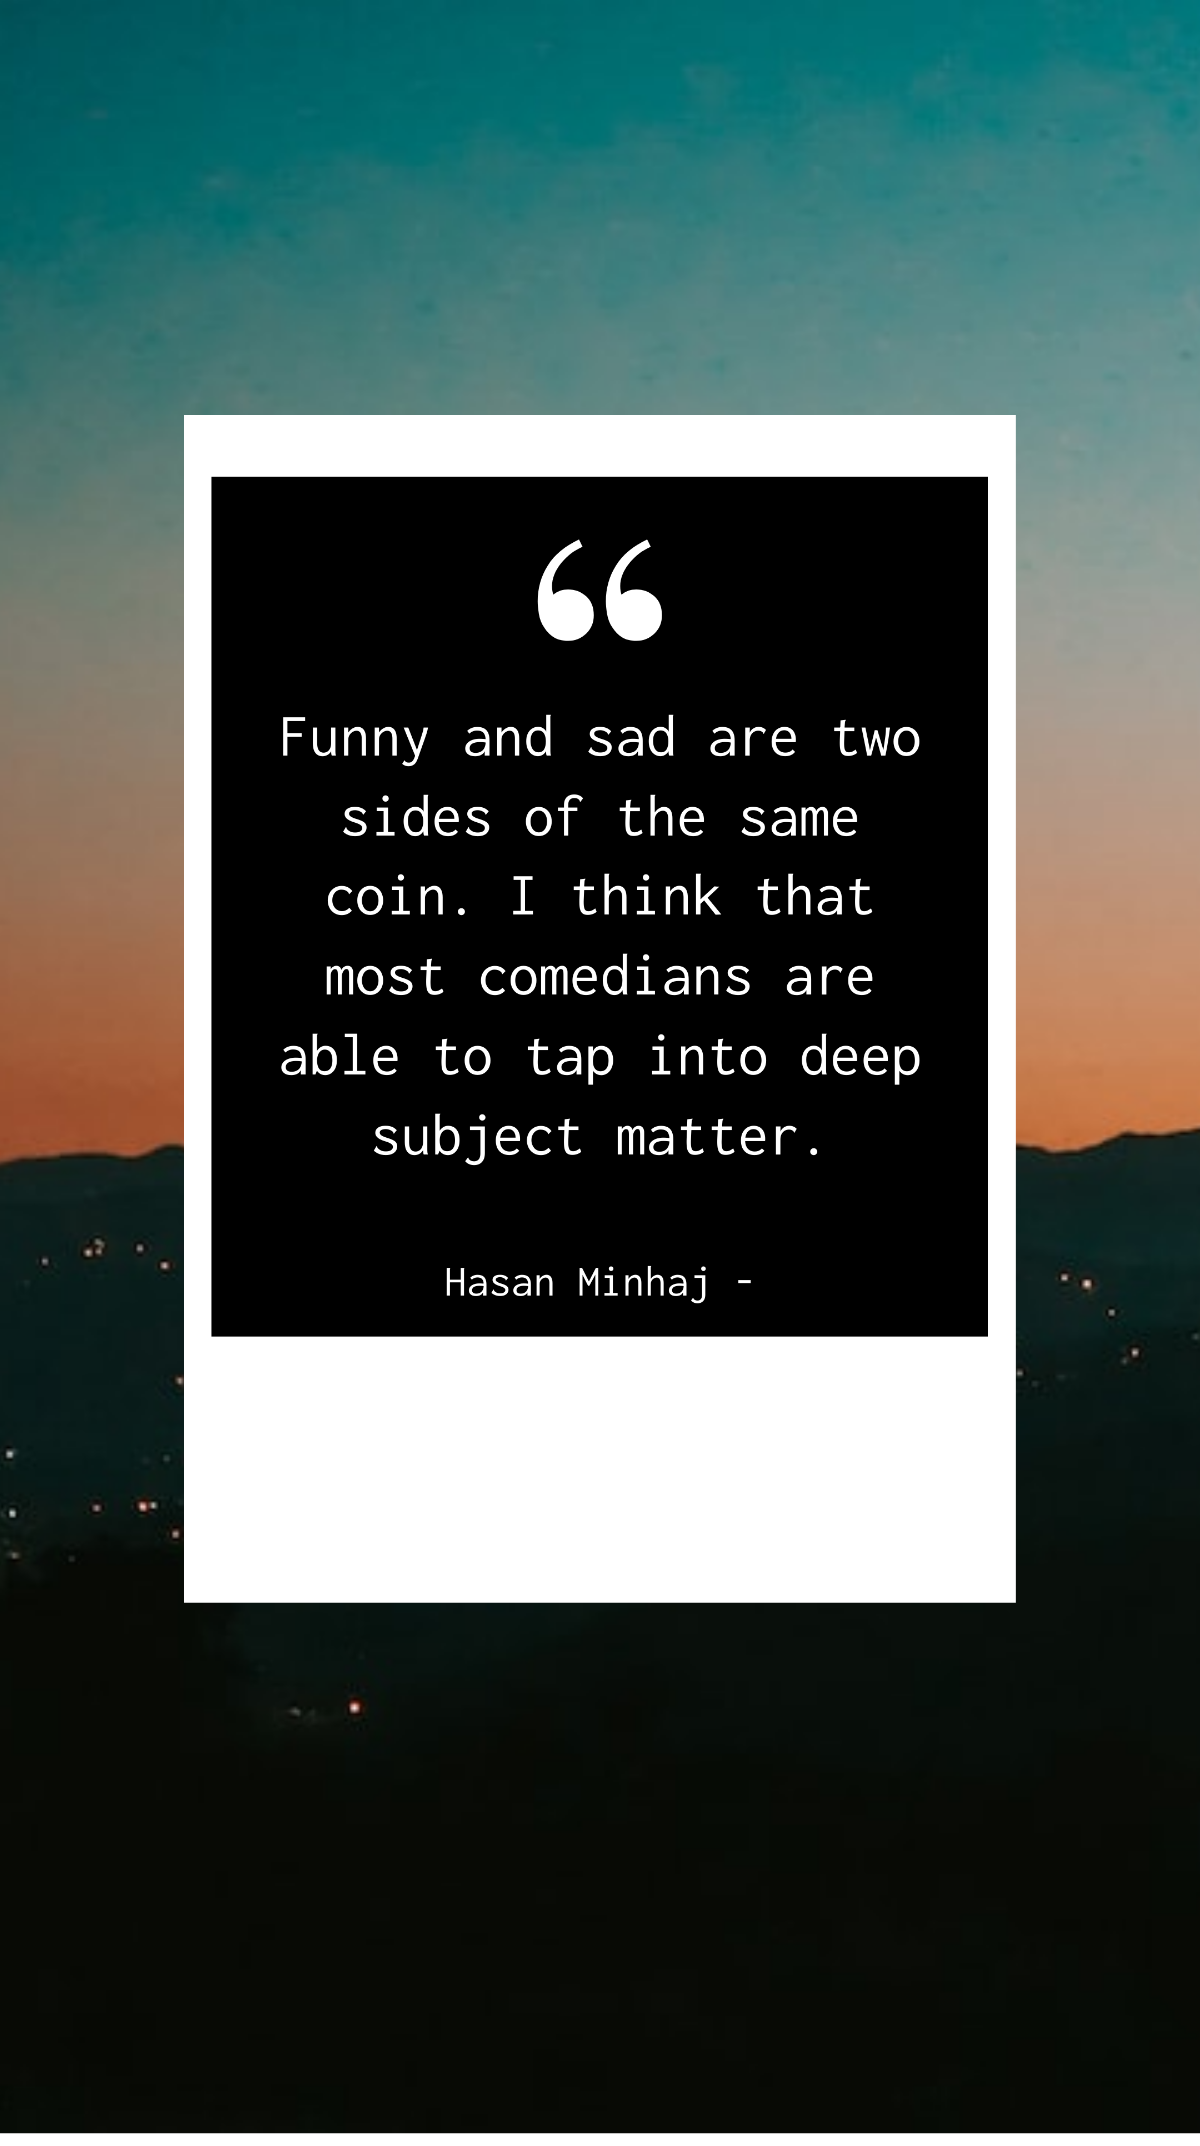 Hasan Minhaj - Funny and sad are two sides of the same coin. I think that most comedians are able to tap into deep subject matter. Template